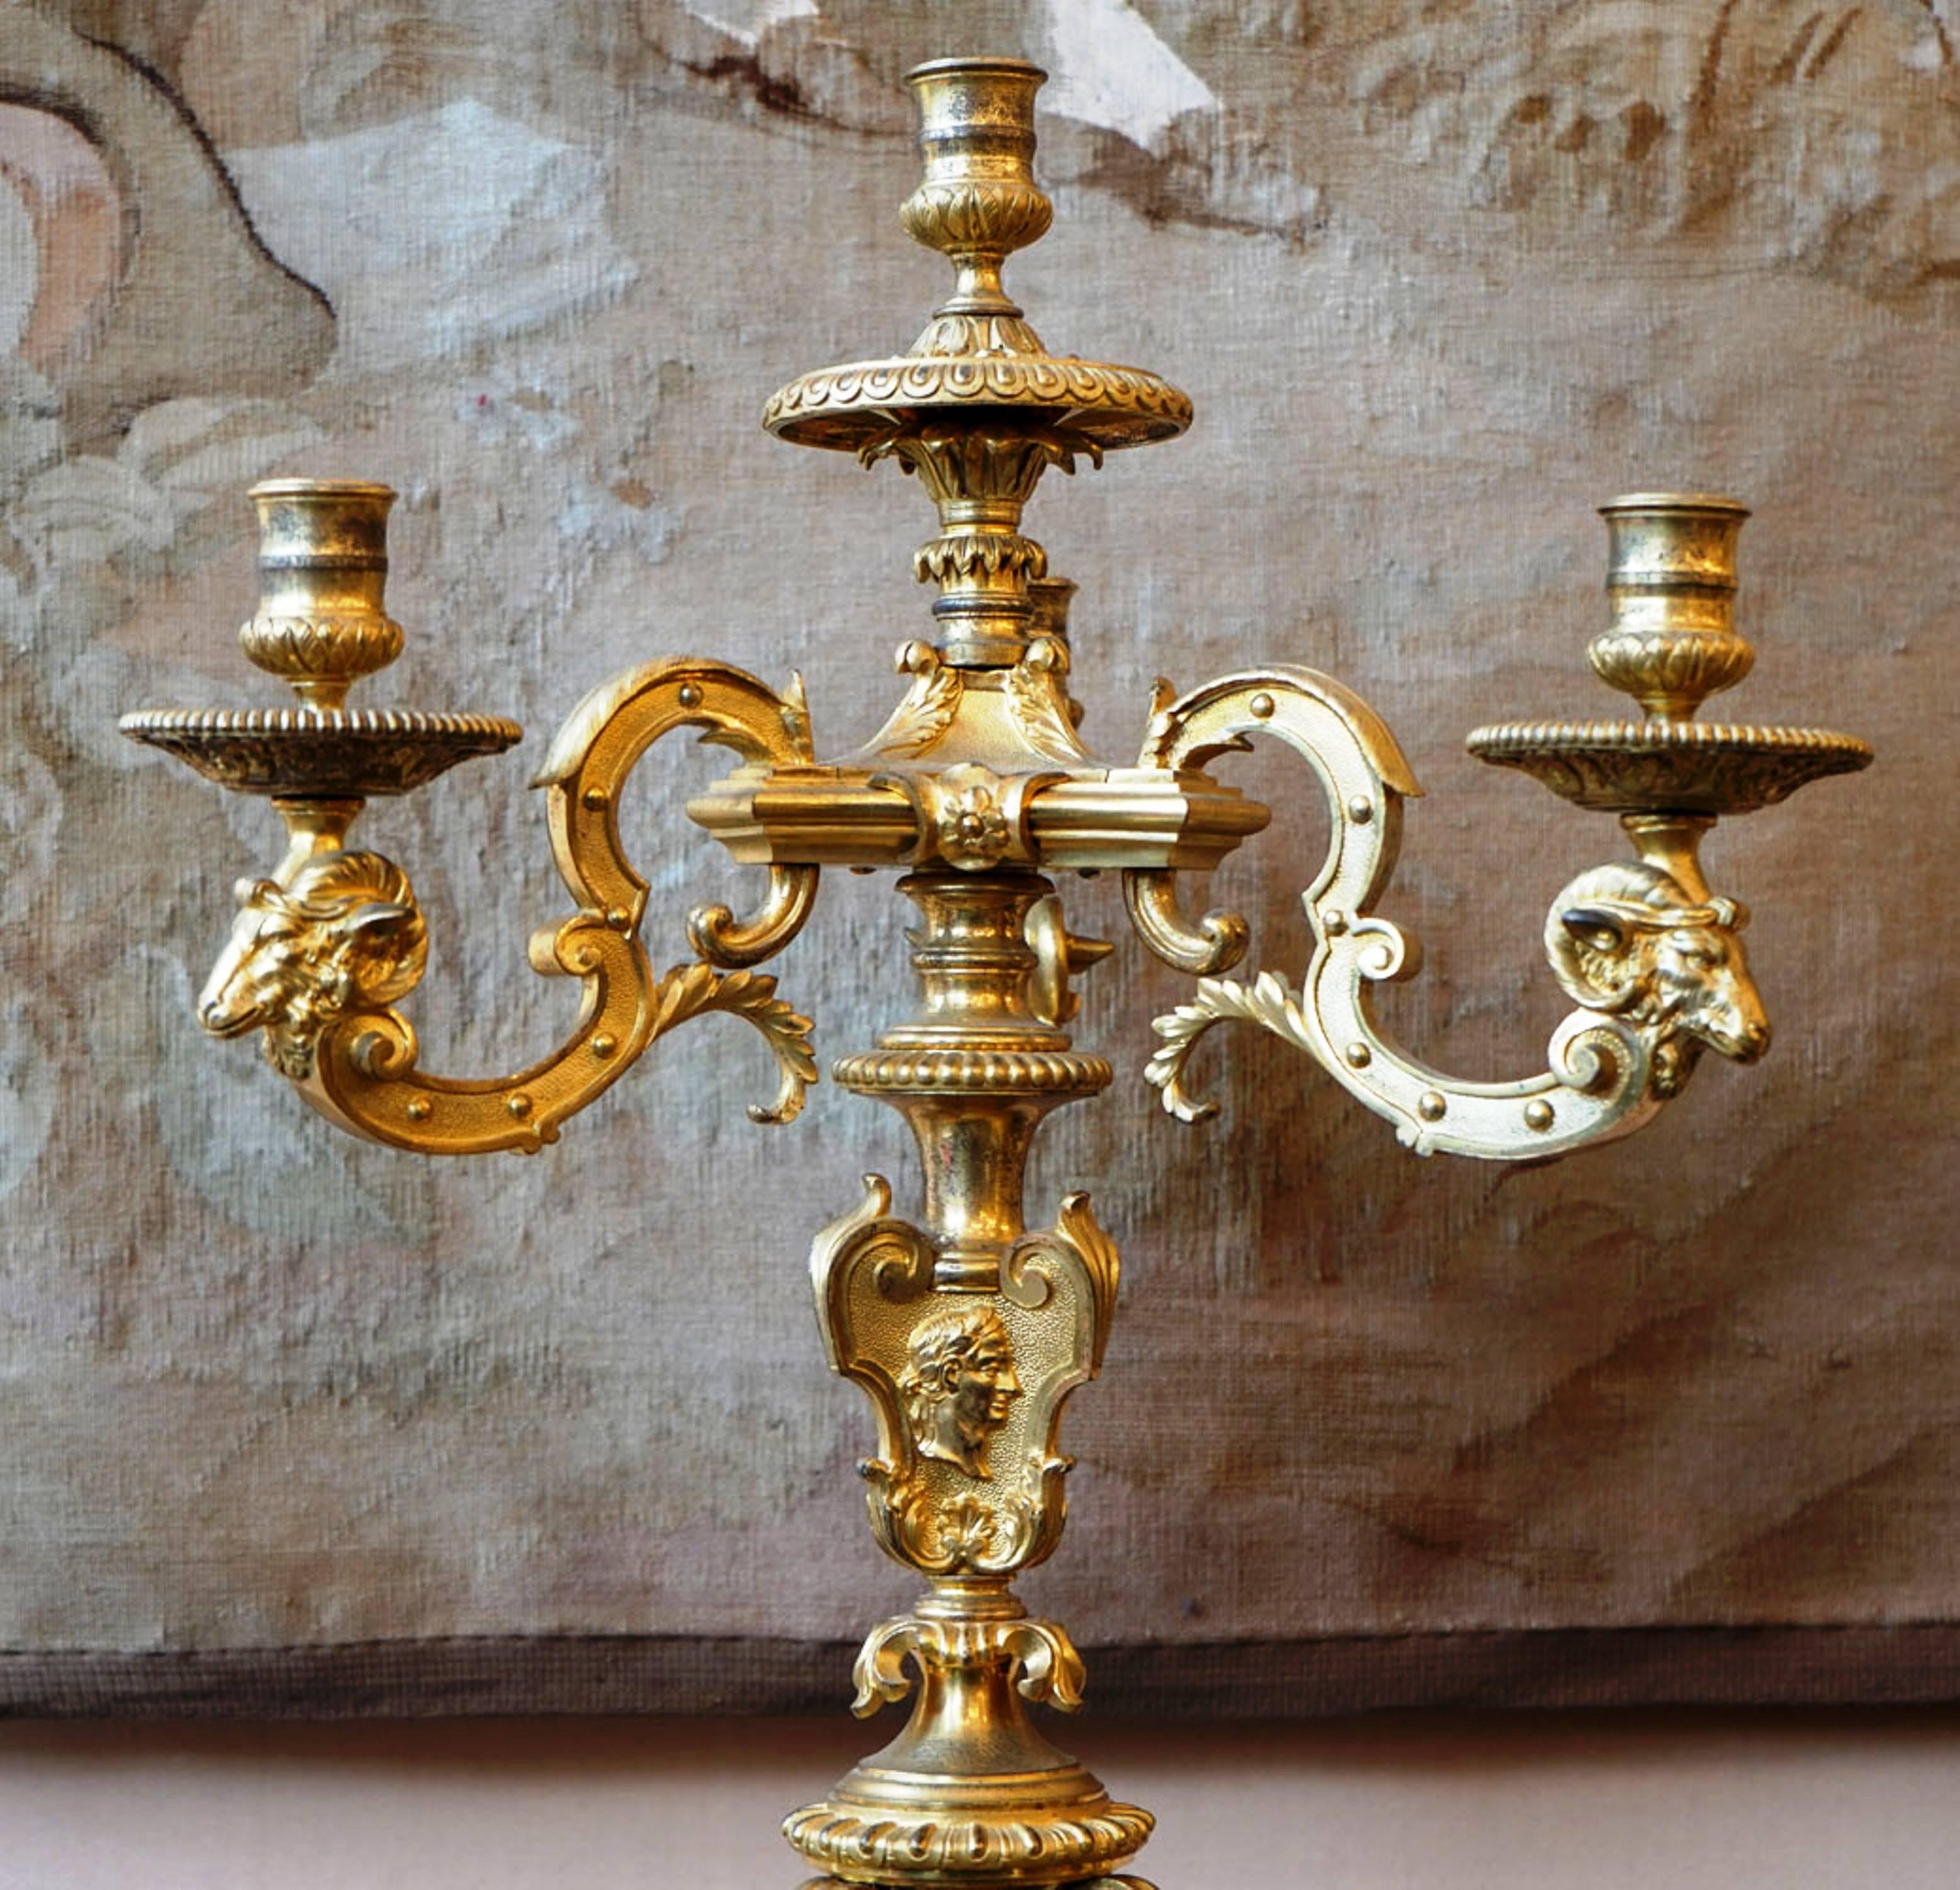 French Splendid Pair of Candelabras, Gilt-Bronze, Louis XIV Style, France, circa 1880 For Sale